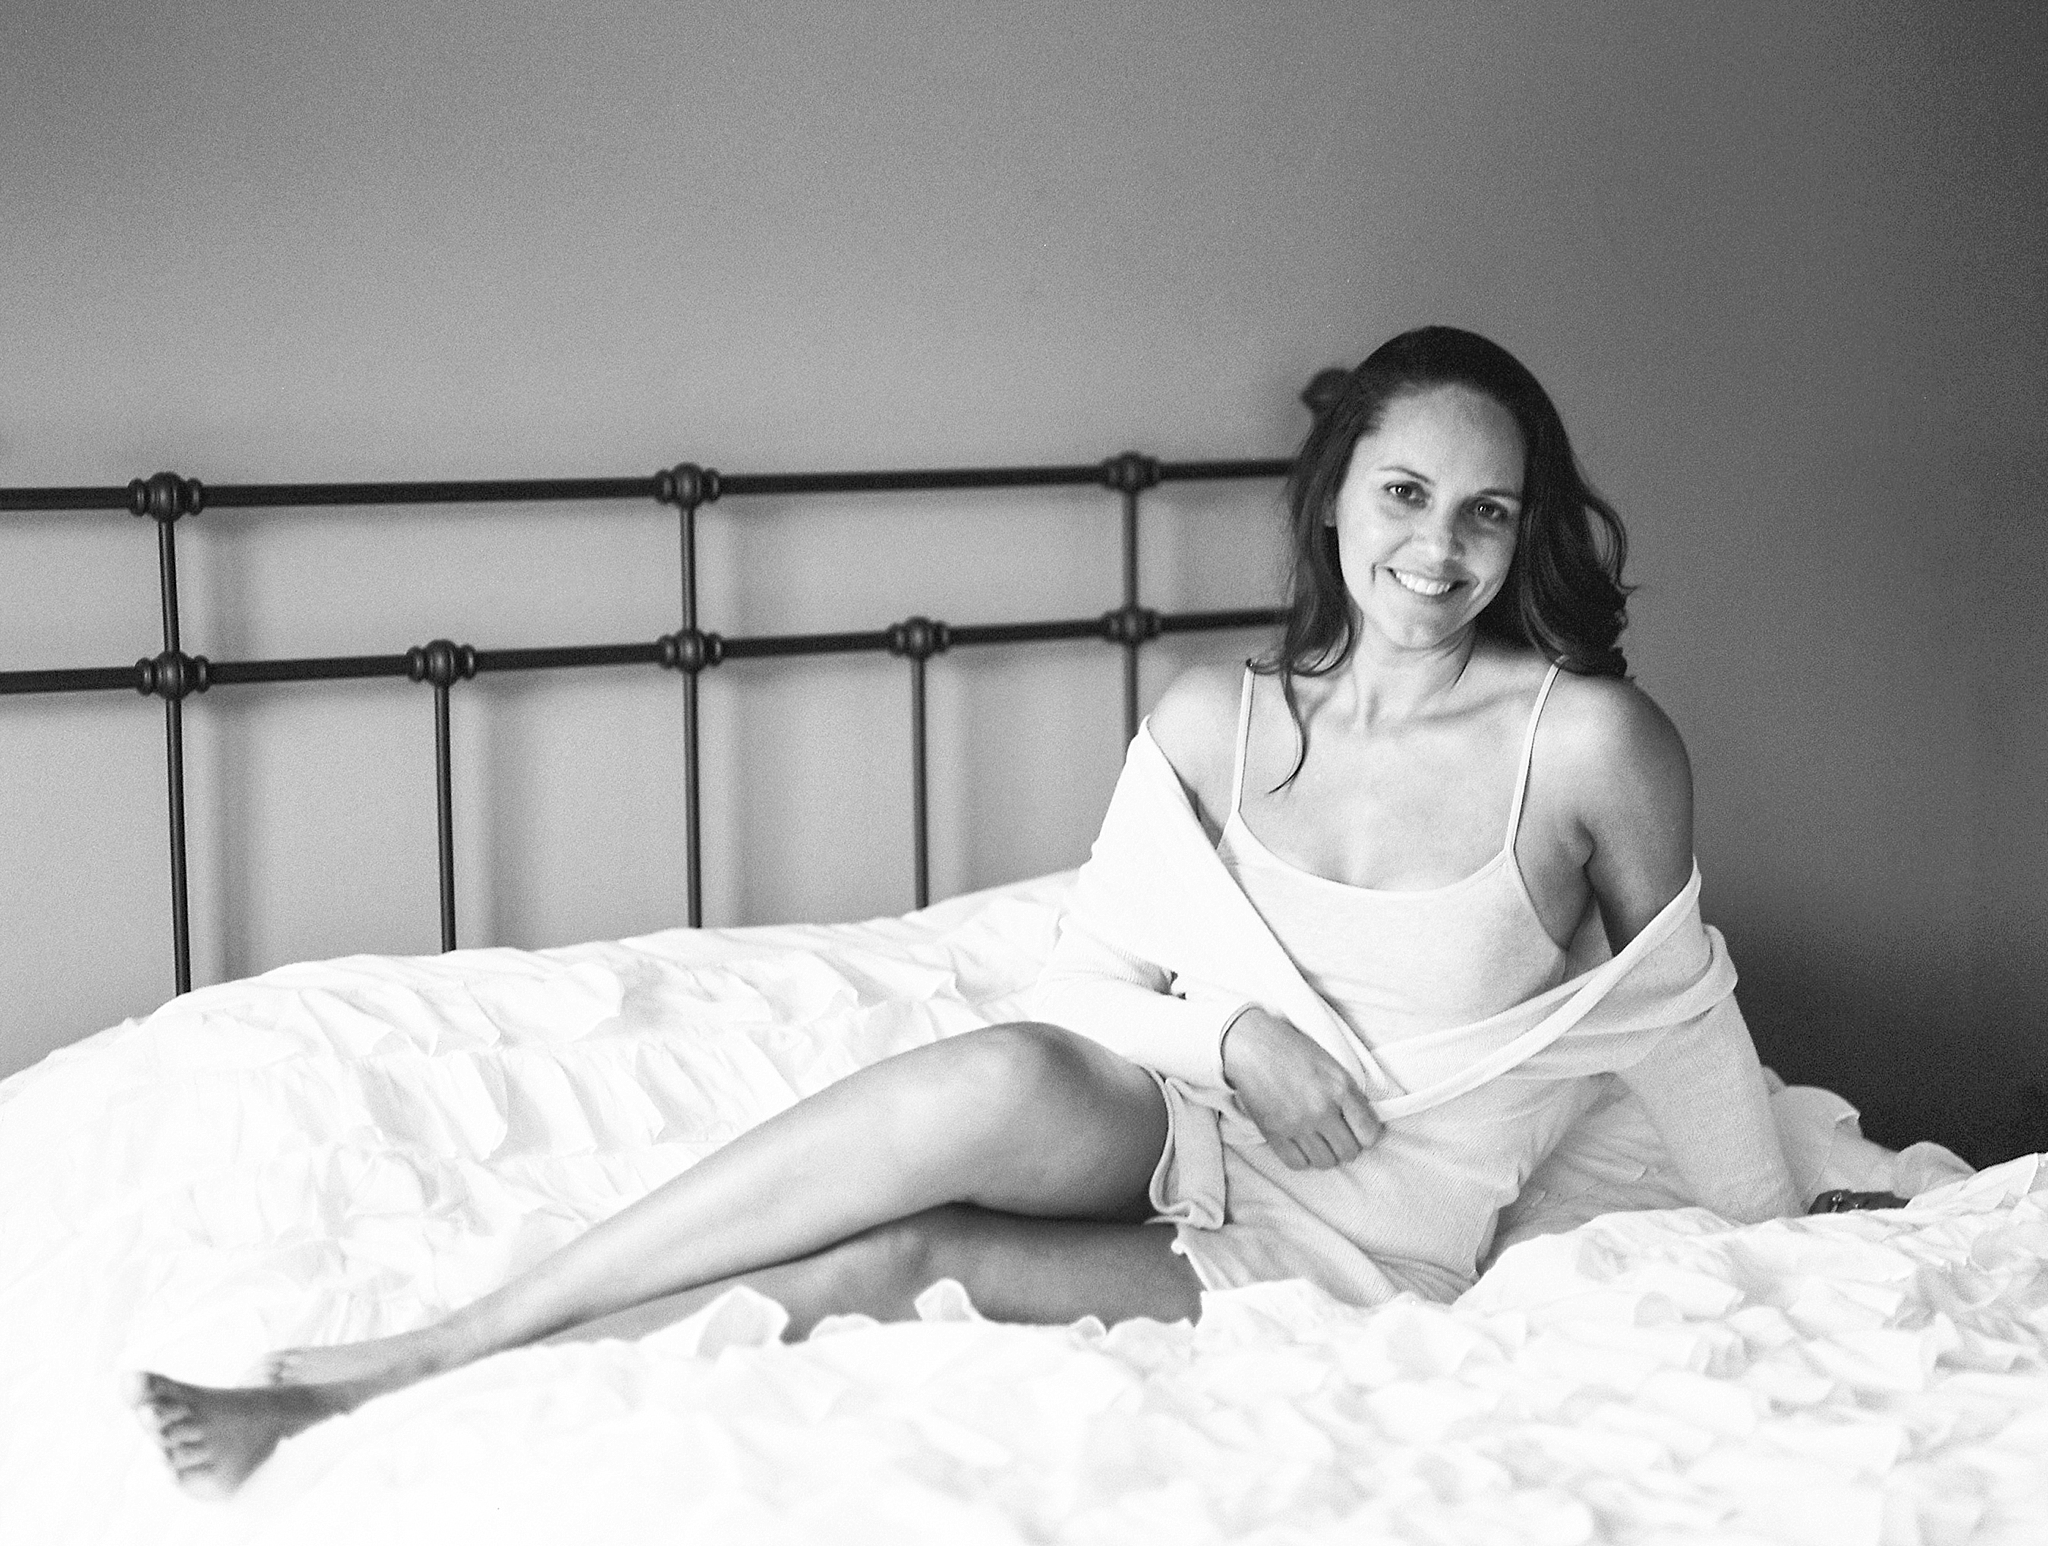 Alicia Lacey, a Washington, DC wedding photographer, promotes self-confidence and inner beauty through black and white film photos for The Portrait Project.